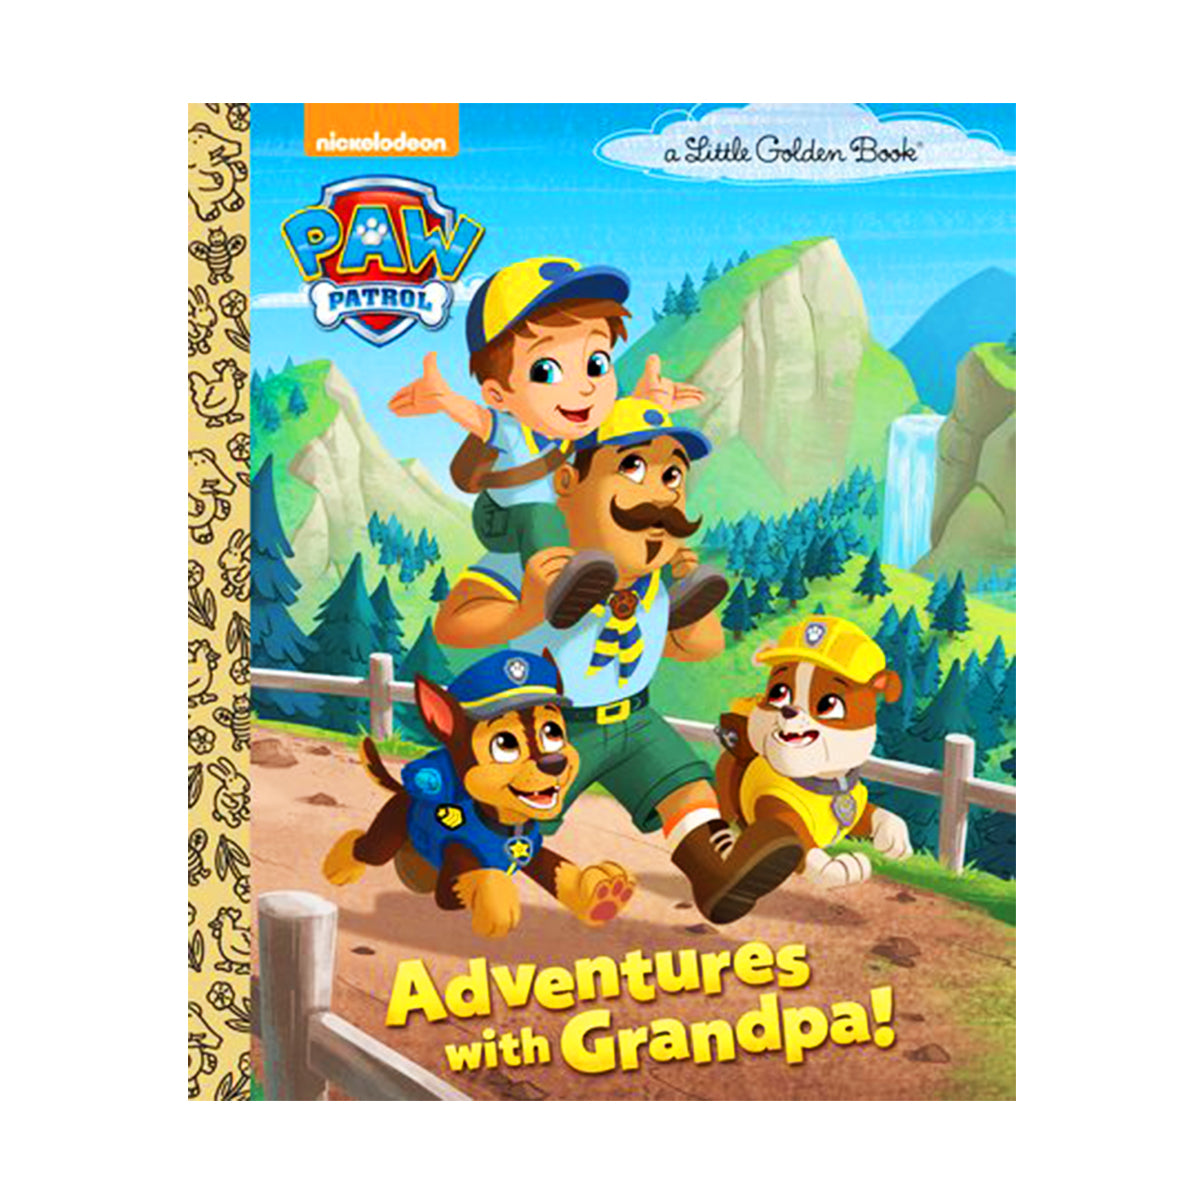 Paw Patrol - Adventures With Grandpa Story Book